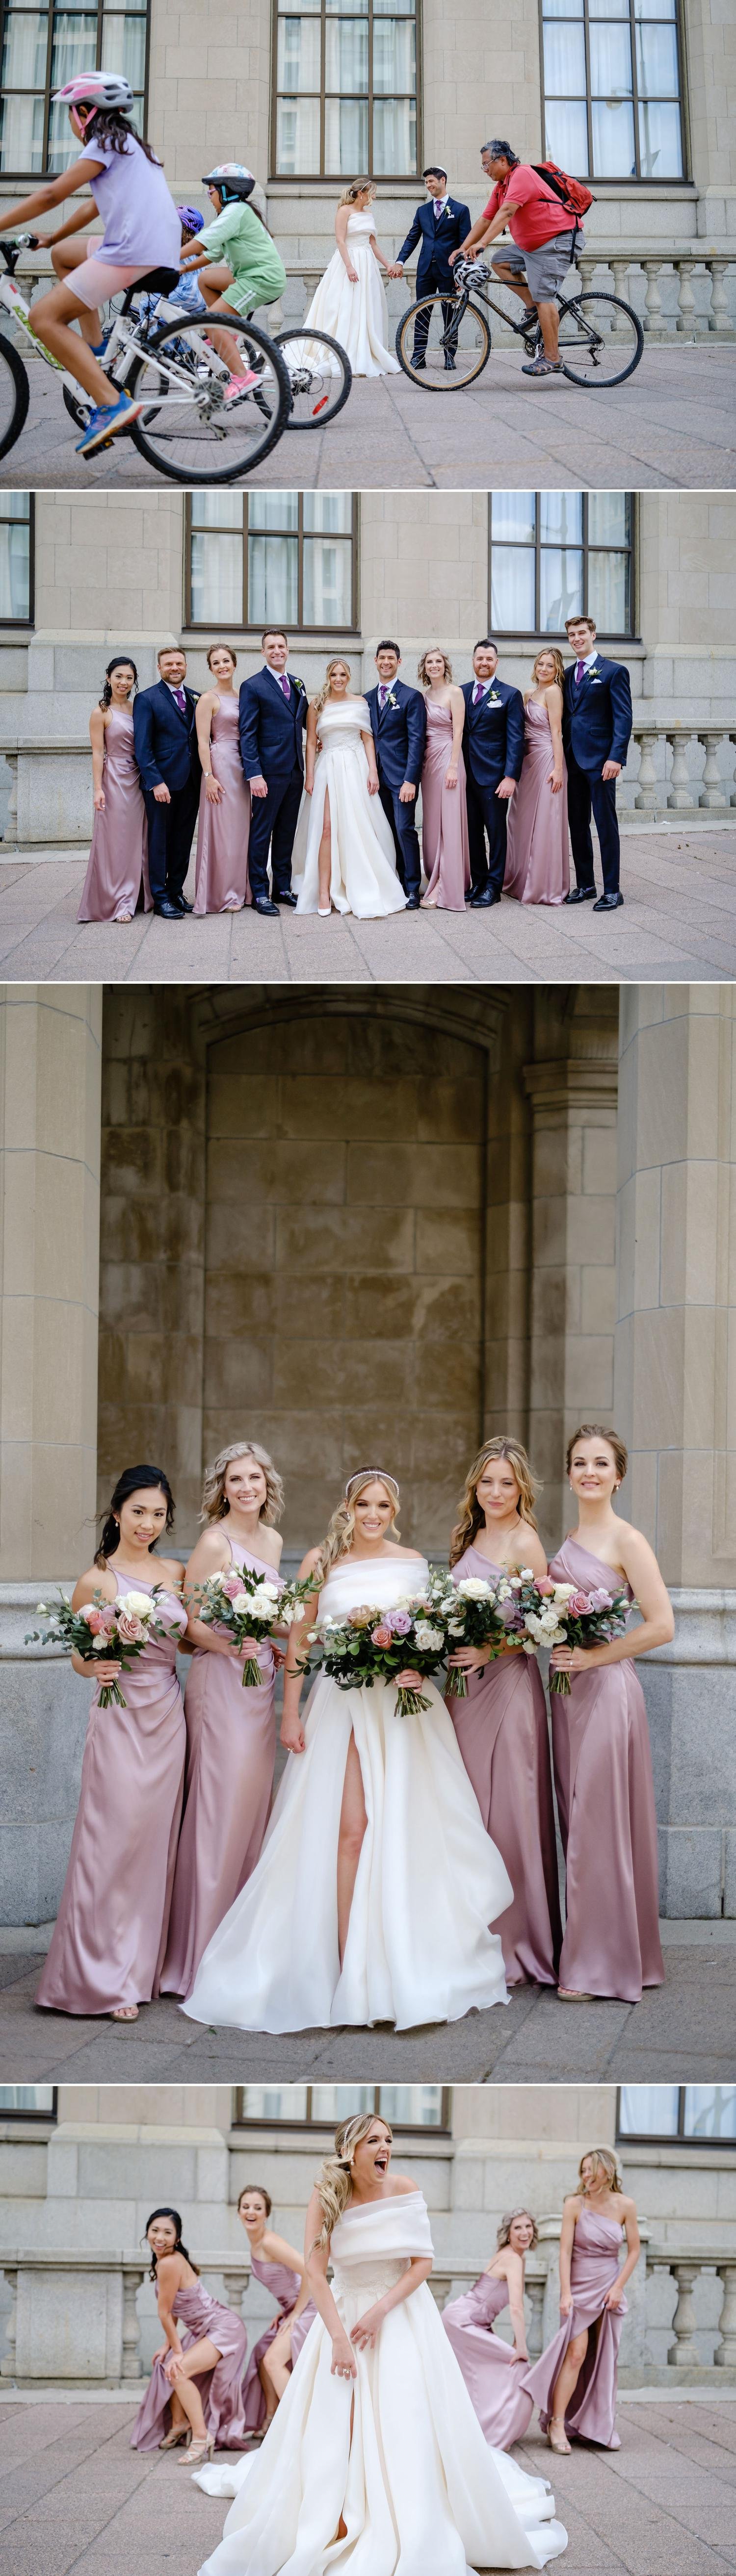 wedding party photos in downtown ottawa by the chateau Laurier